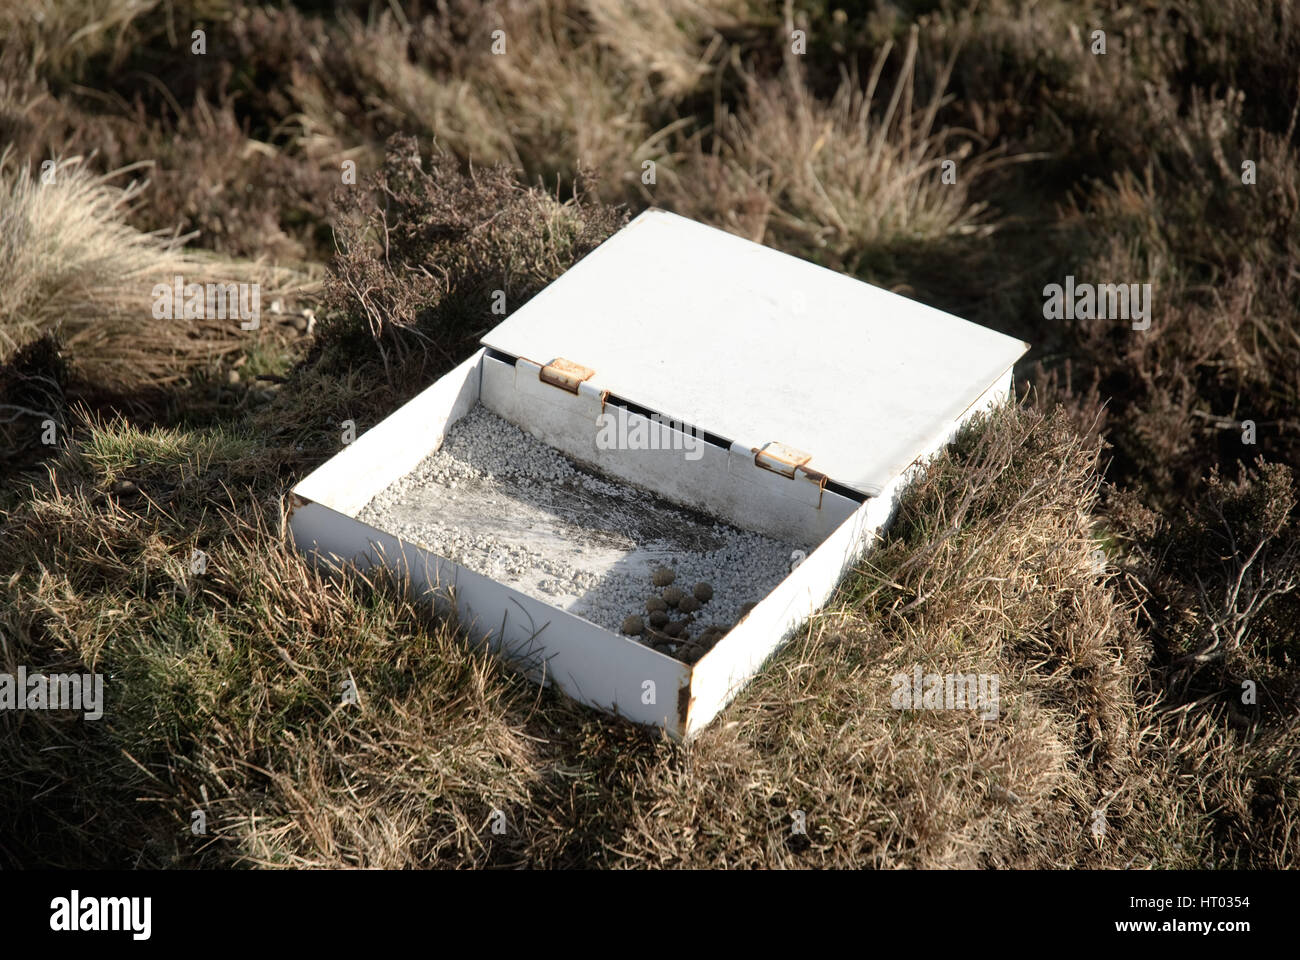 A grit station on a Lammermuir grouse shooting moor. Grouse require grit as part of their diet - sometimes is it medicated to treat worm infestations. Stock Photo